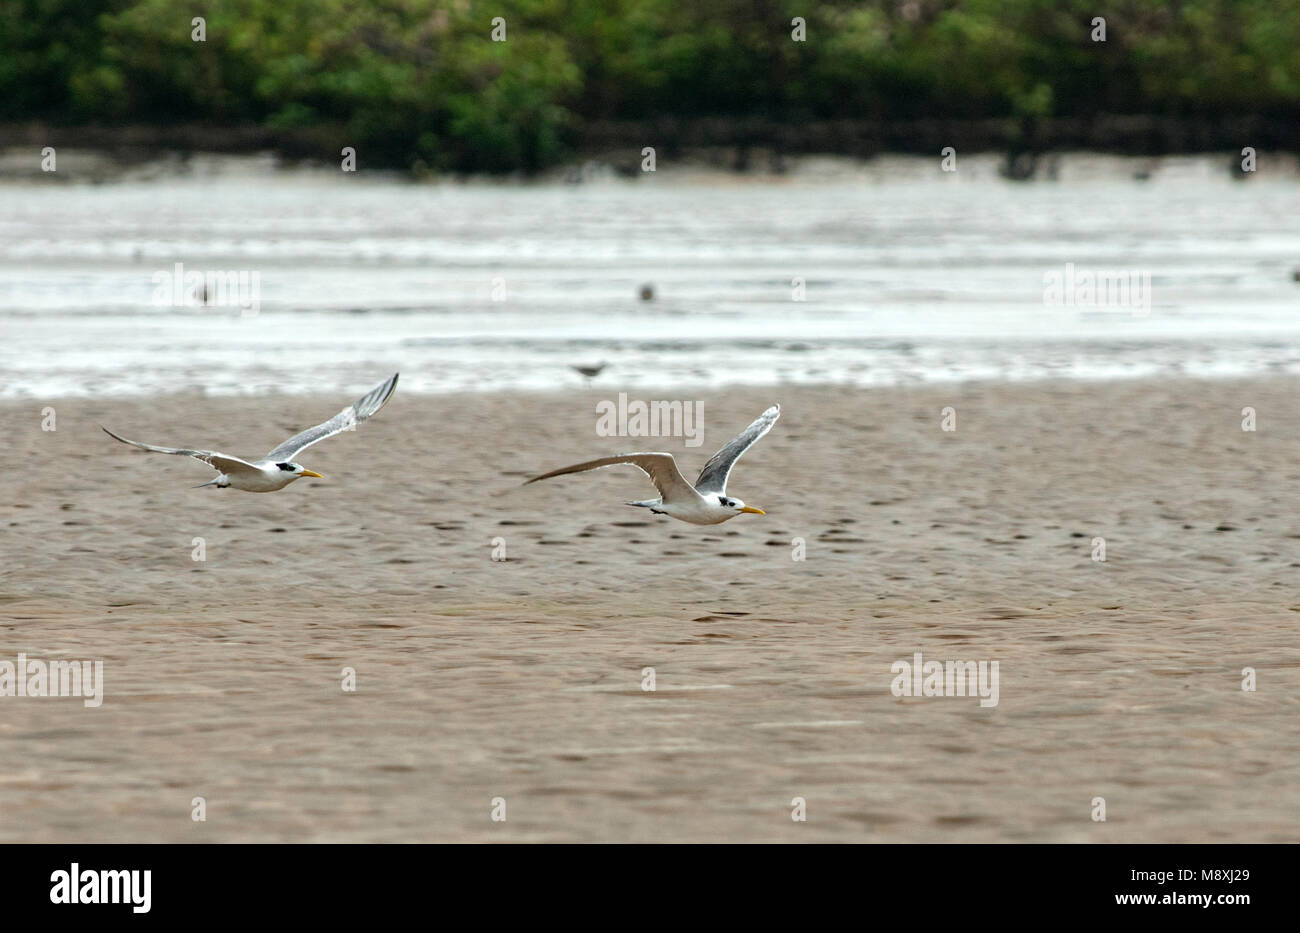 Grote Kuifstern in vlucht, Great Crested Tern in flight Stock Photo